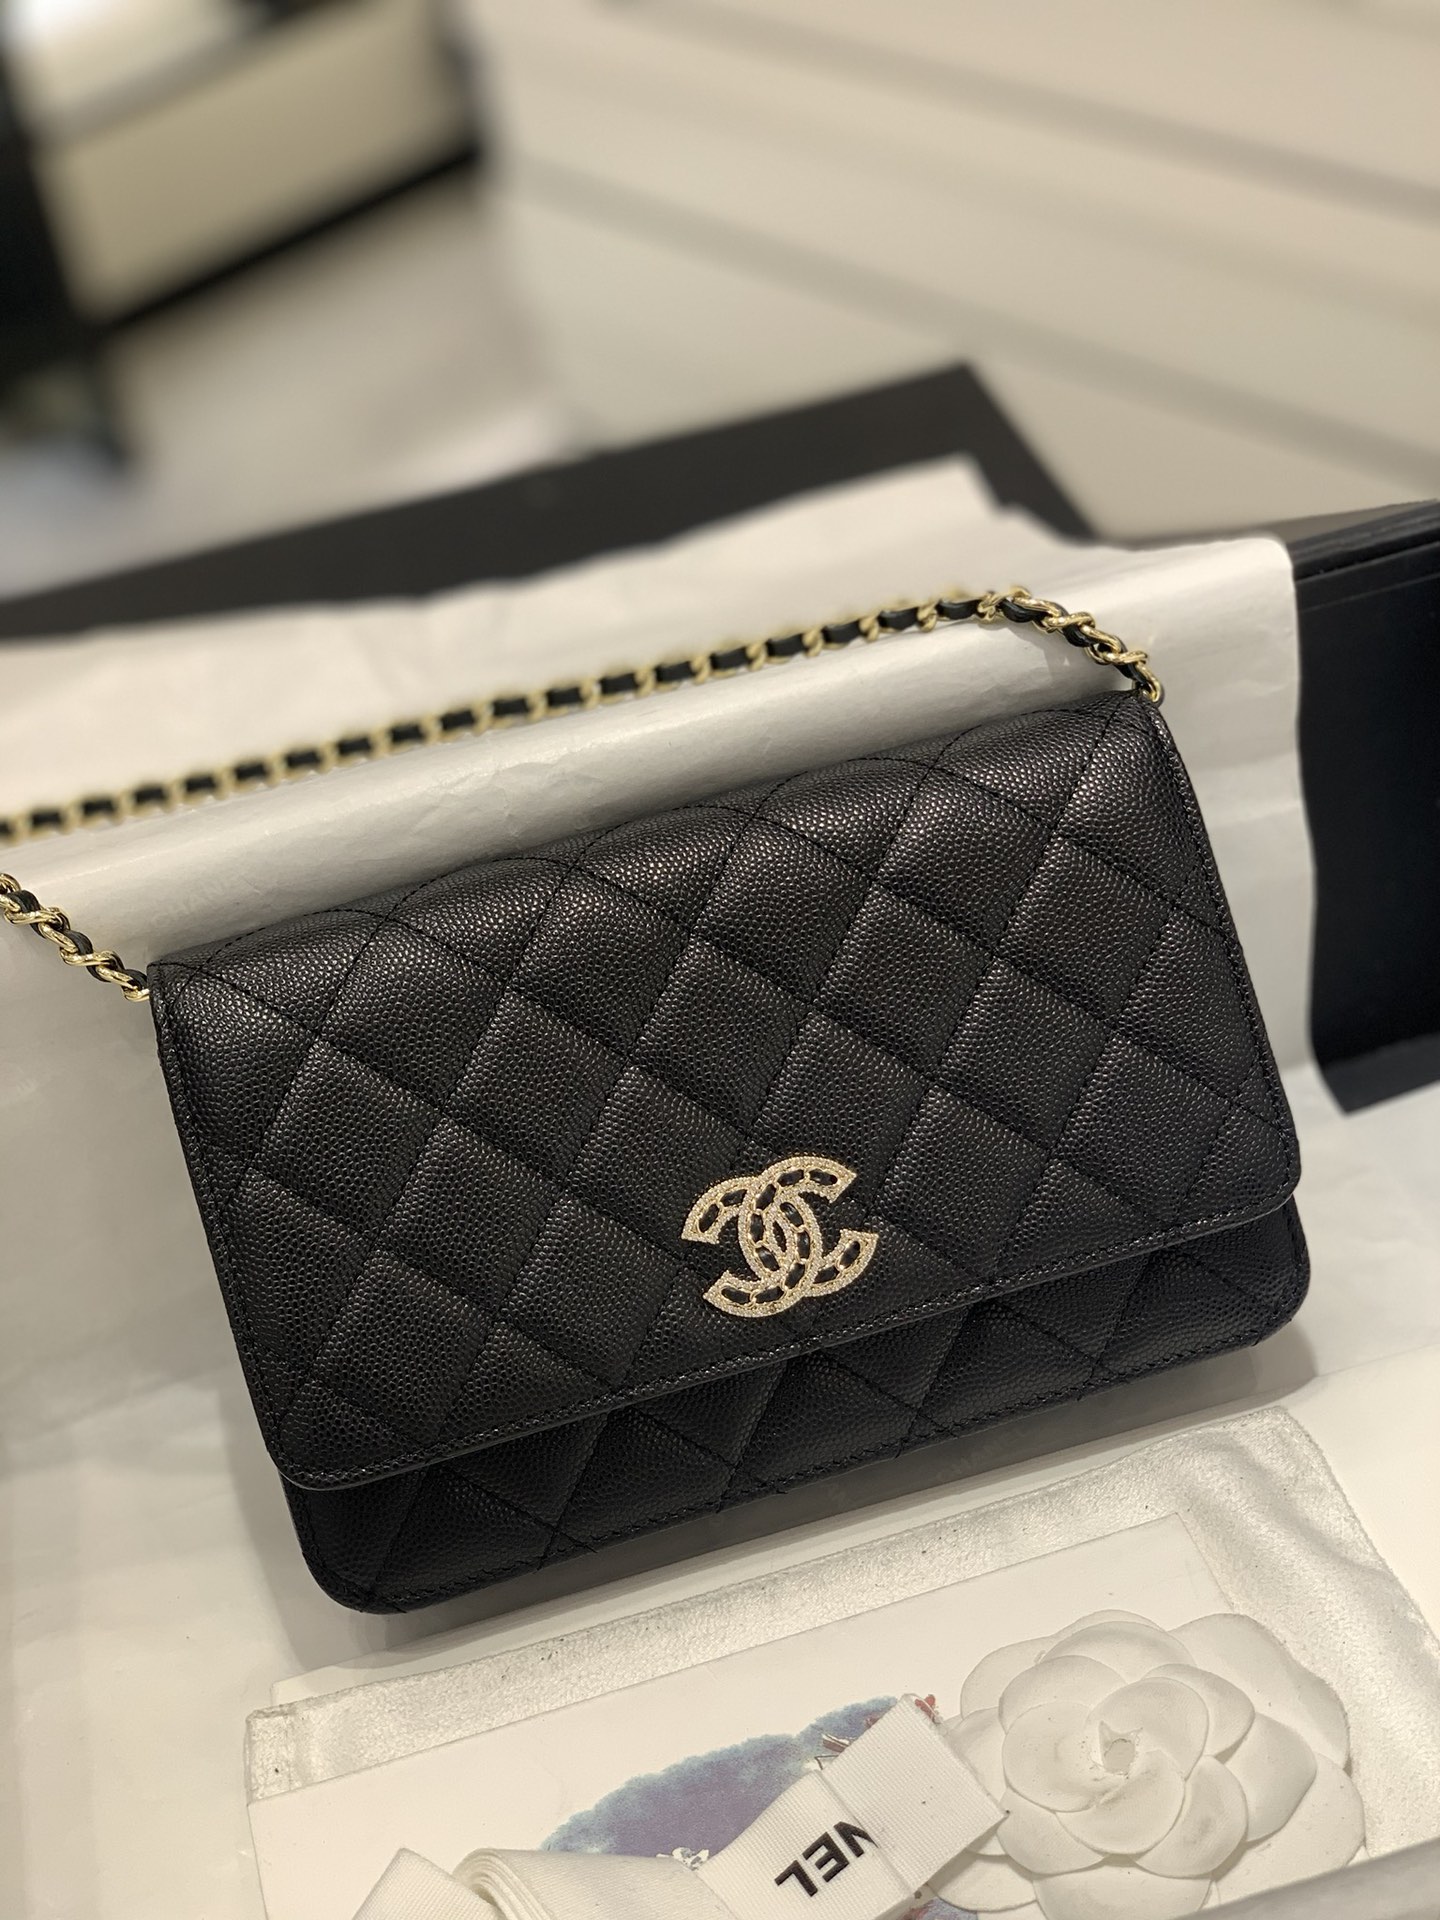 Small leather goods  Reorders  Fashion  CHANEL